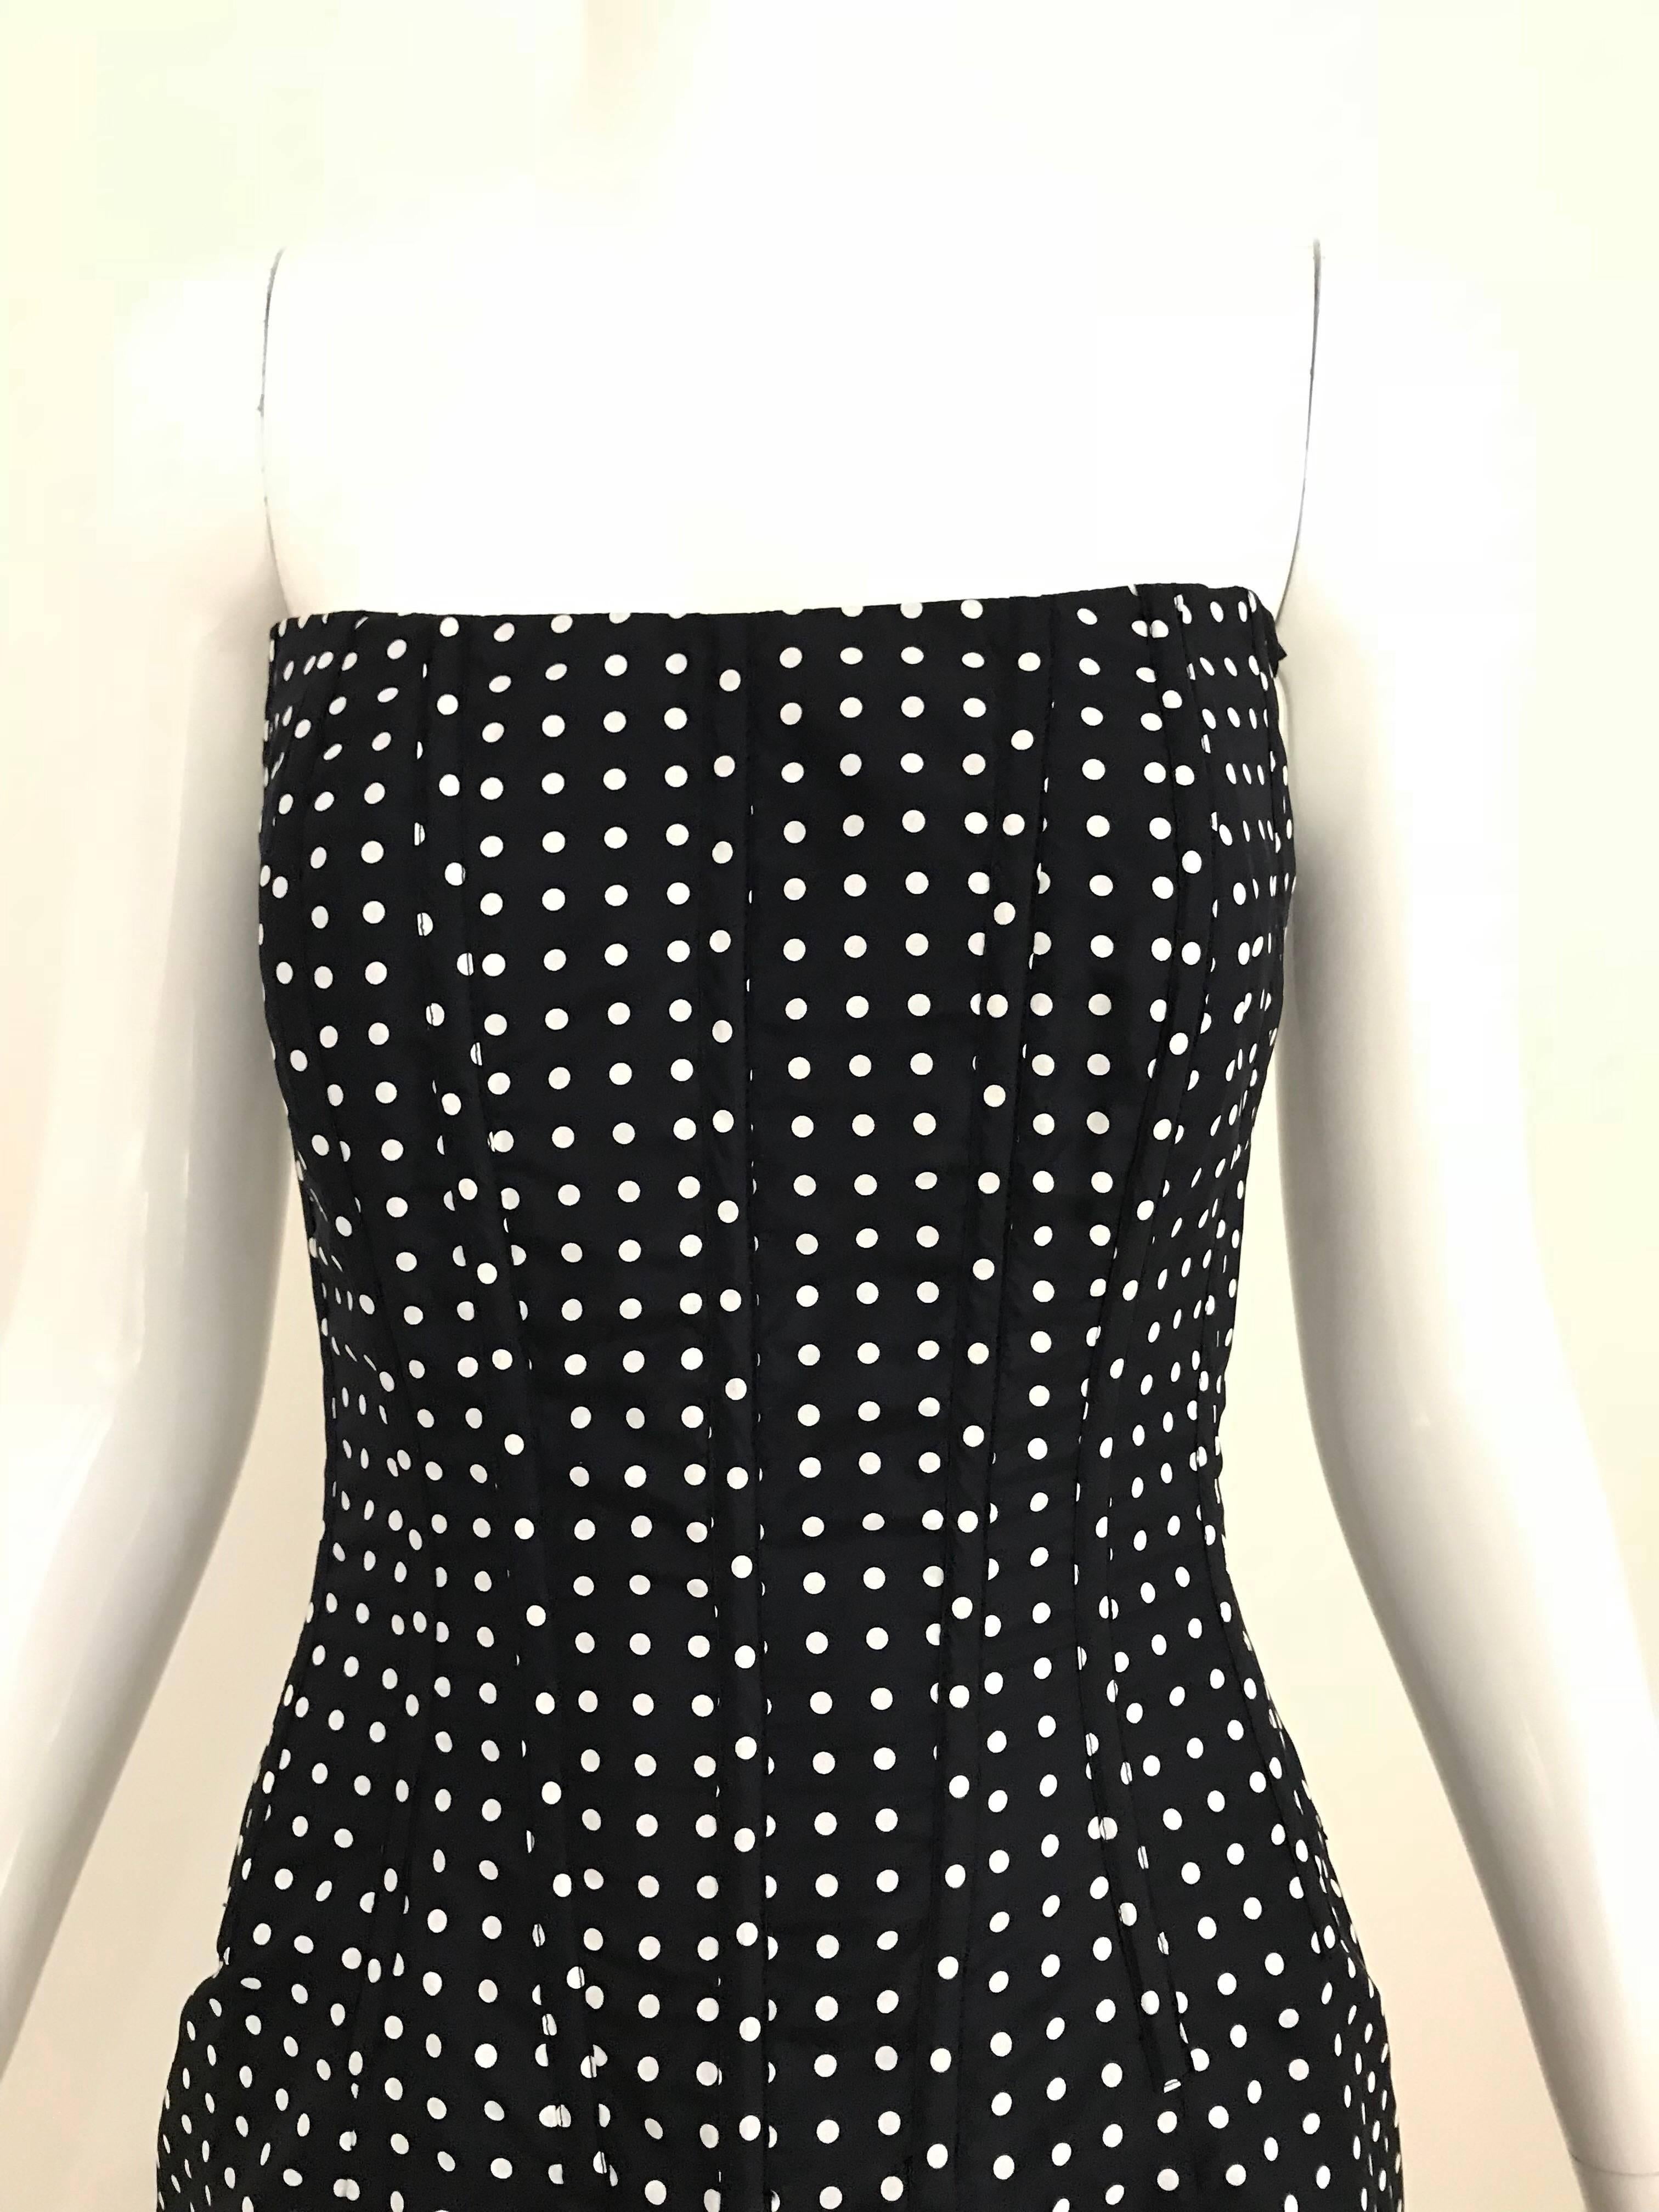 Oscar De La Renta Polka dot Silk strapless Gown cascading ruffles. Perfect for black tie event and red carpet. Marked size 4
Bust: 32